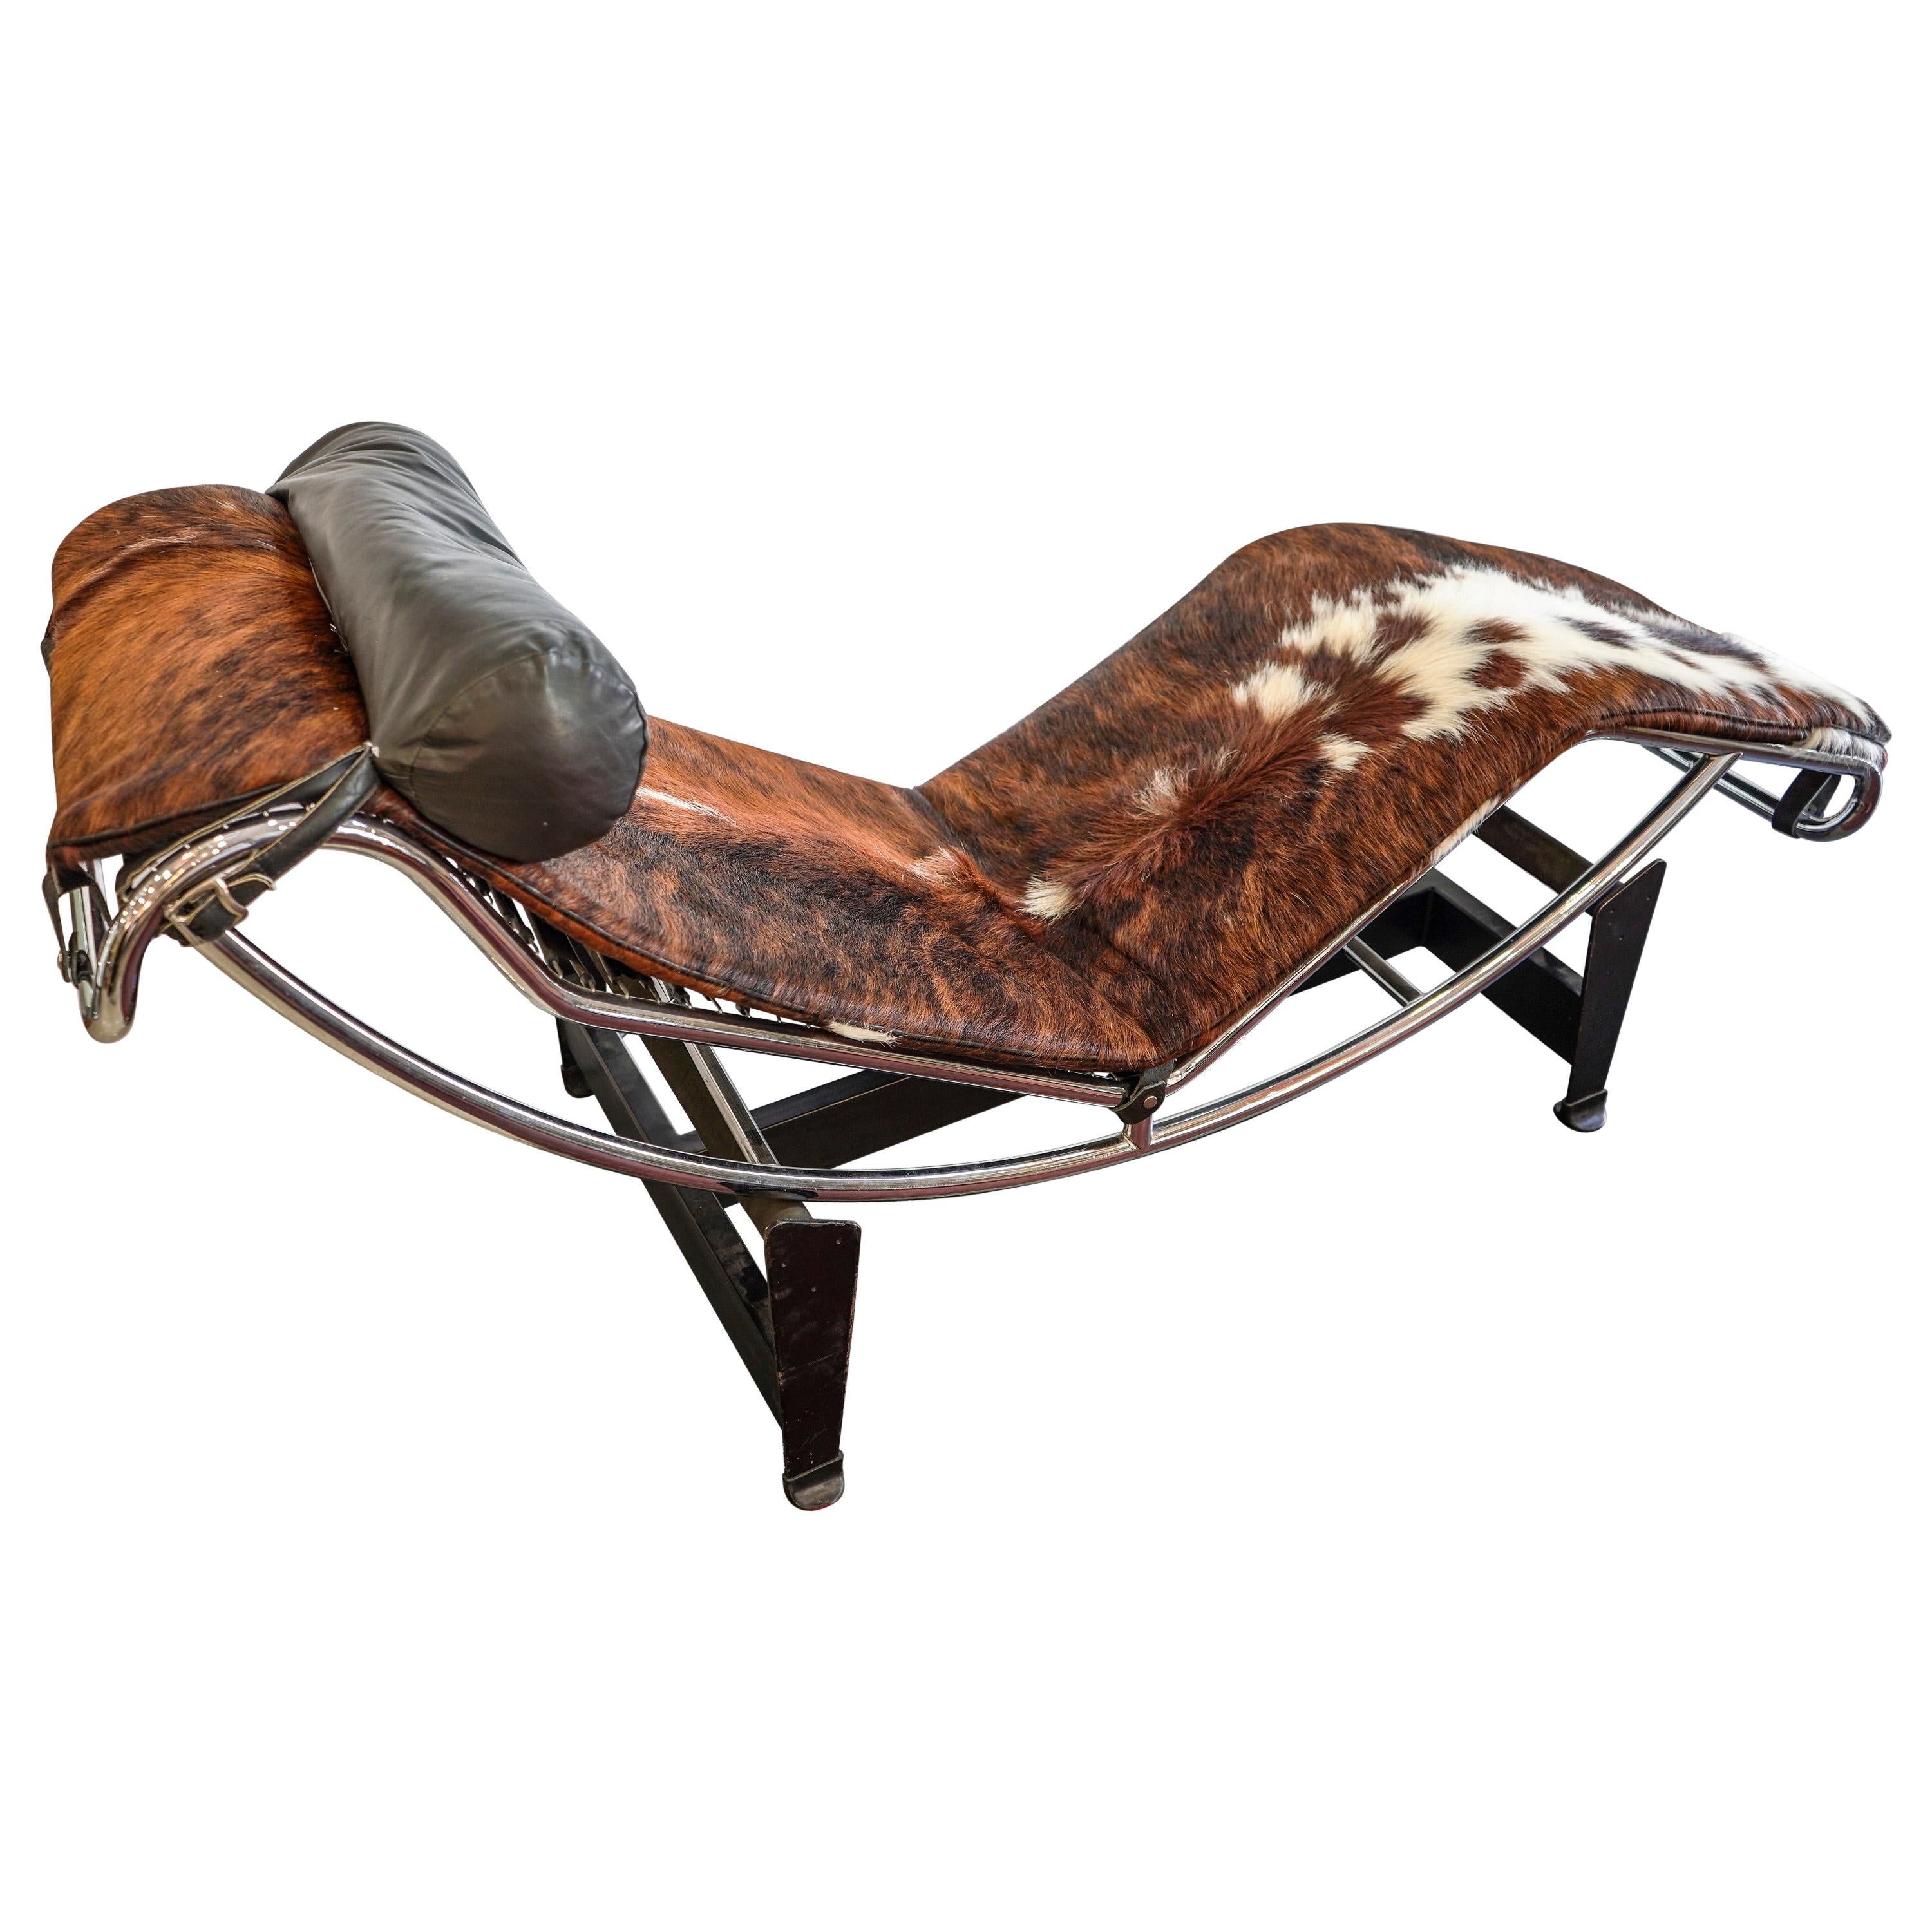 1980s LC4 Le Corbusier Style Chaise Longue, in Chrome Stell and Cowhide